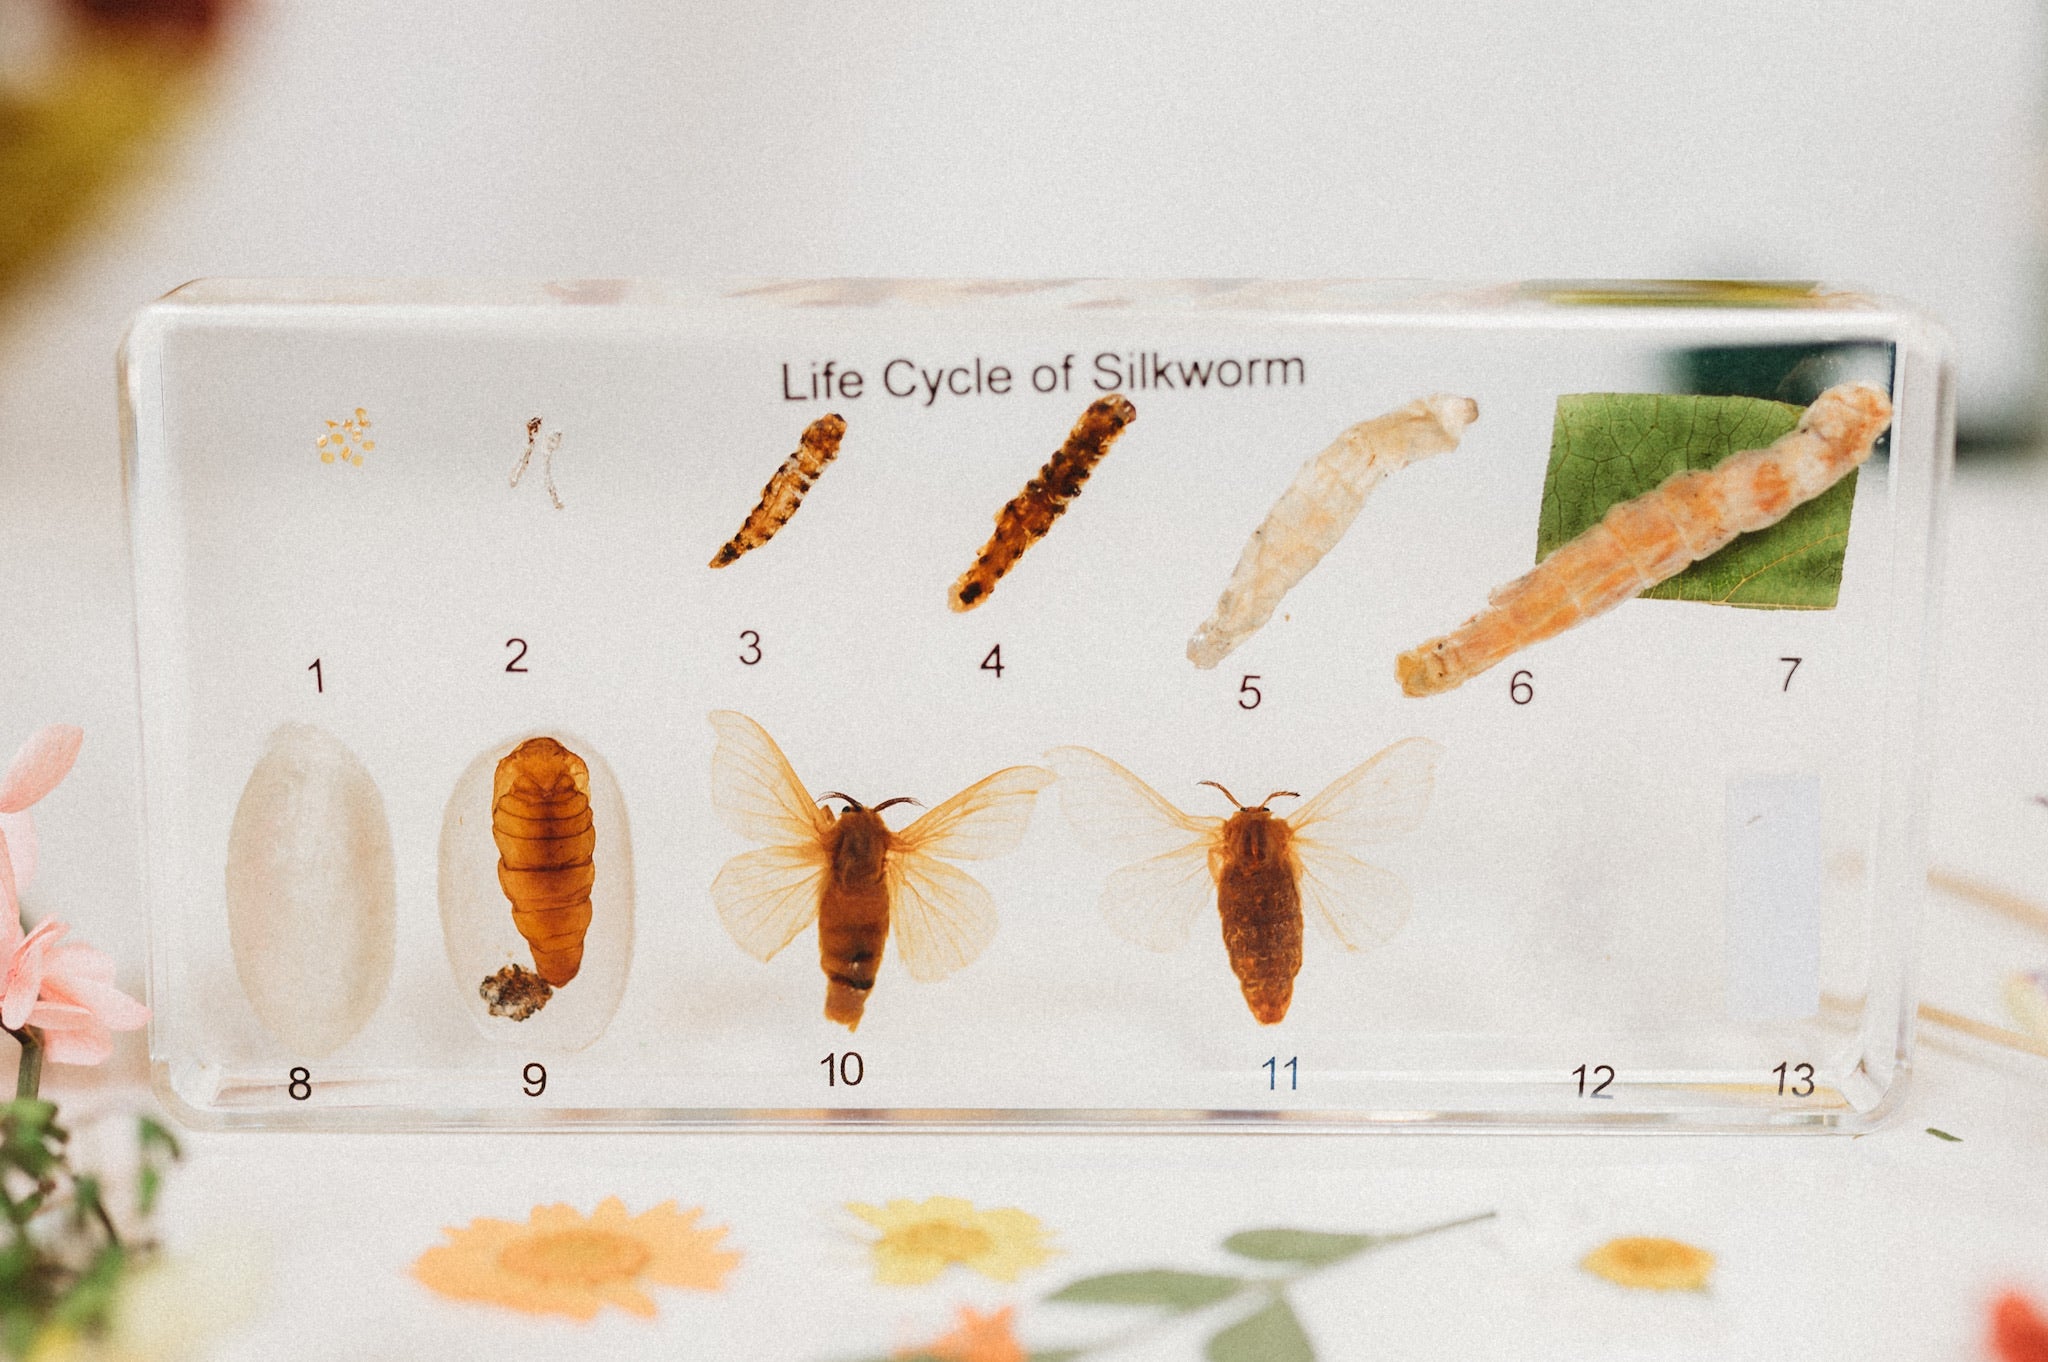 Silk Worm Lifecycle Specimen (Free Shipping)